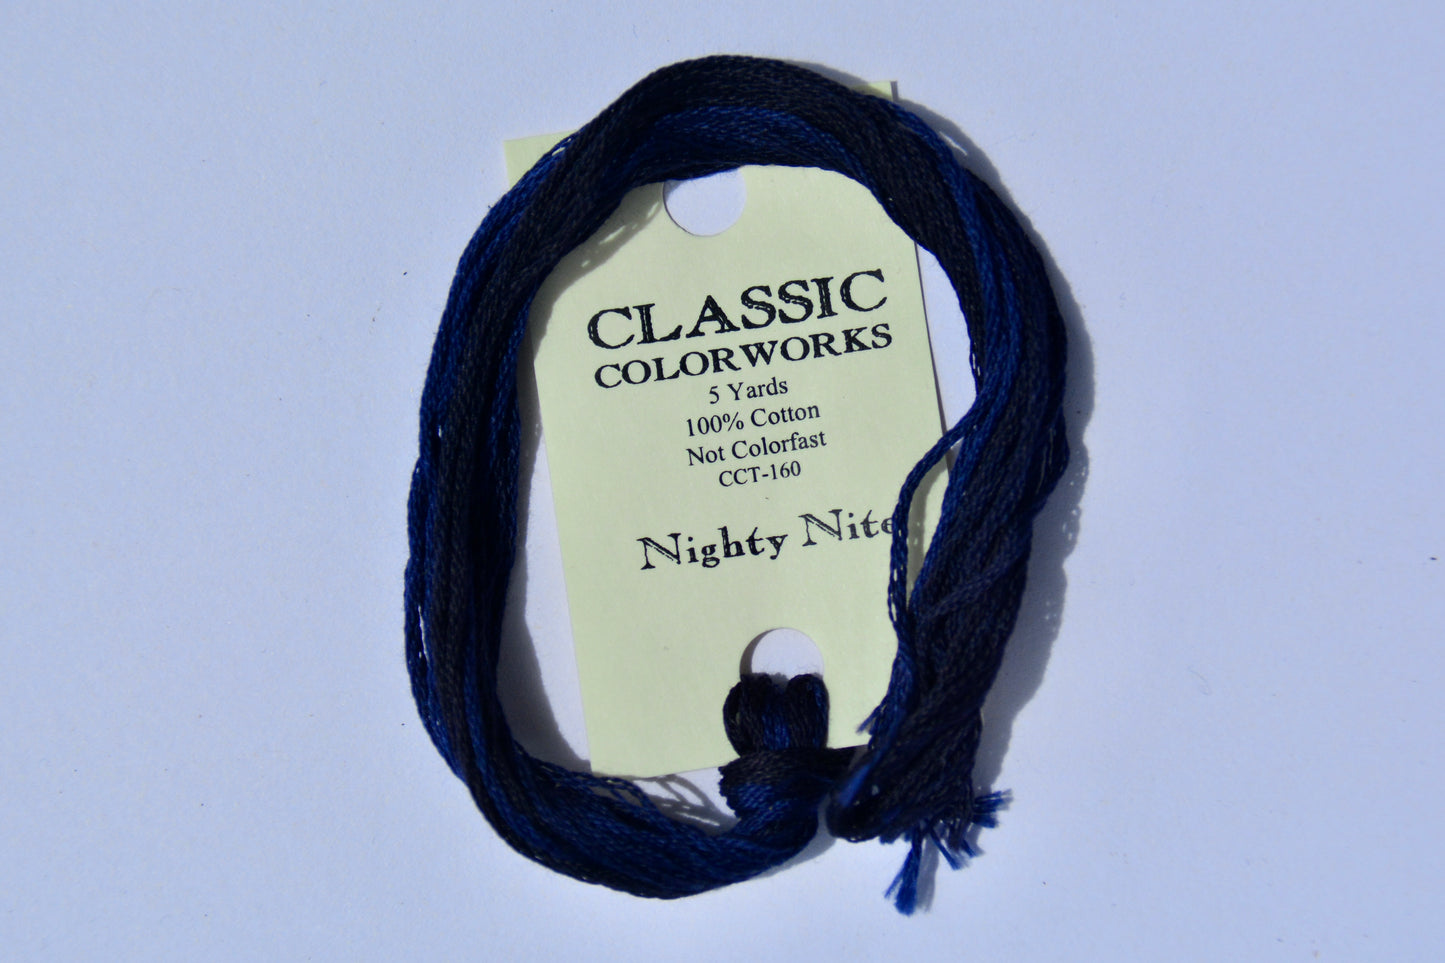 Nighty Nite Colorworks 6-Strand Hand-Dyed Embroidery Floss